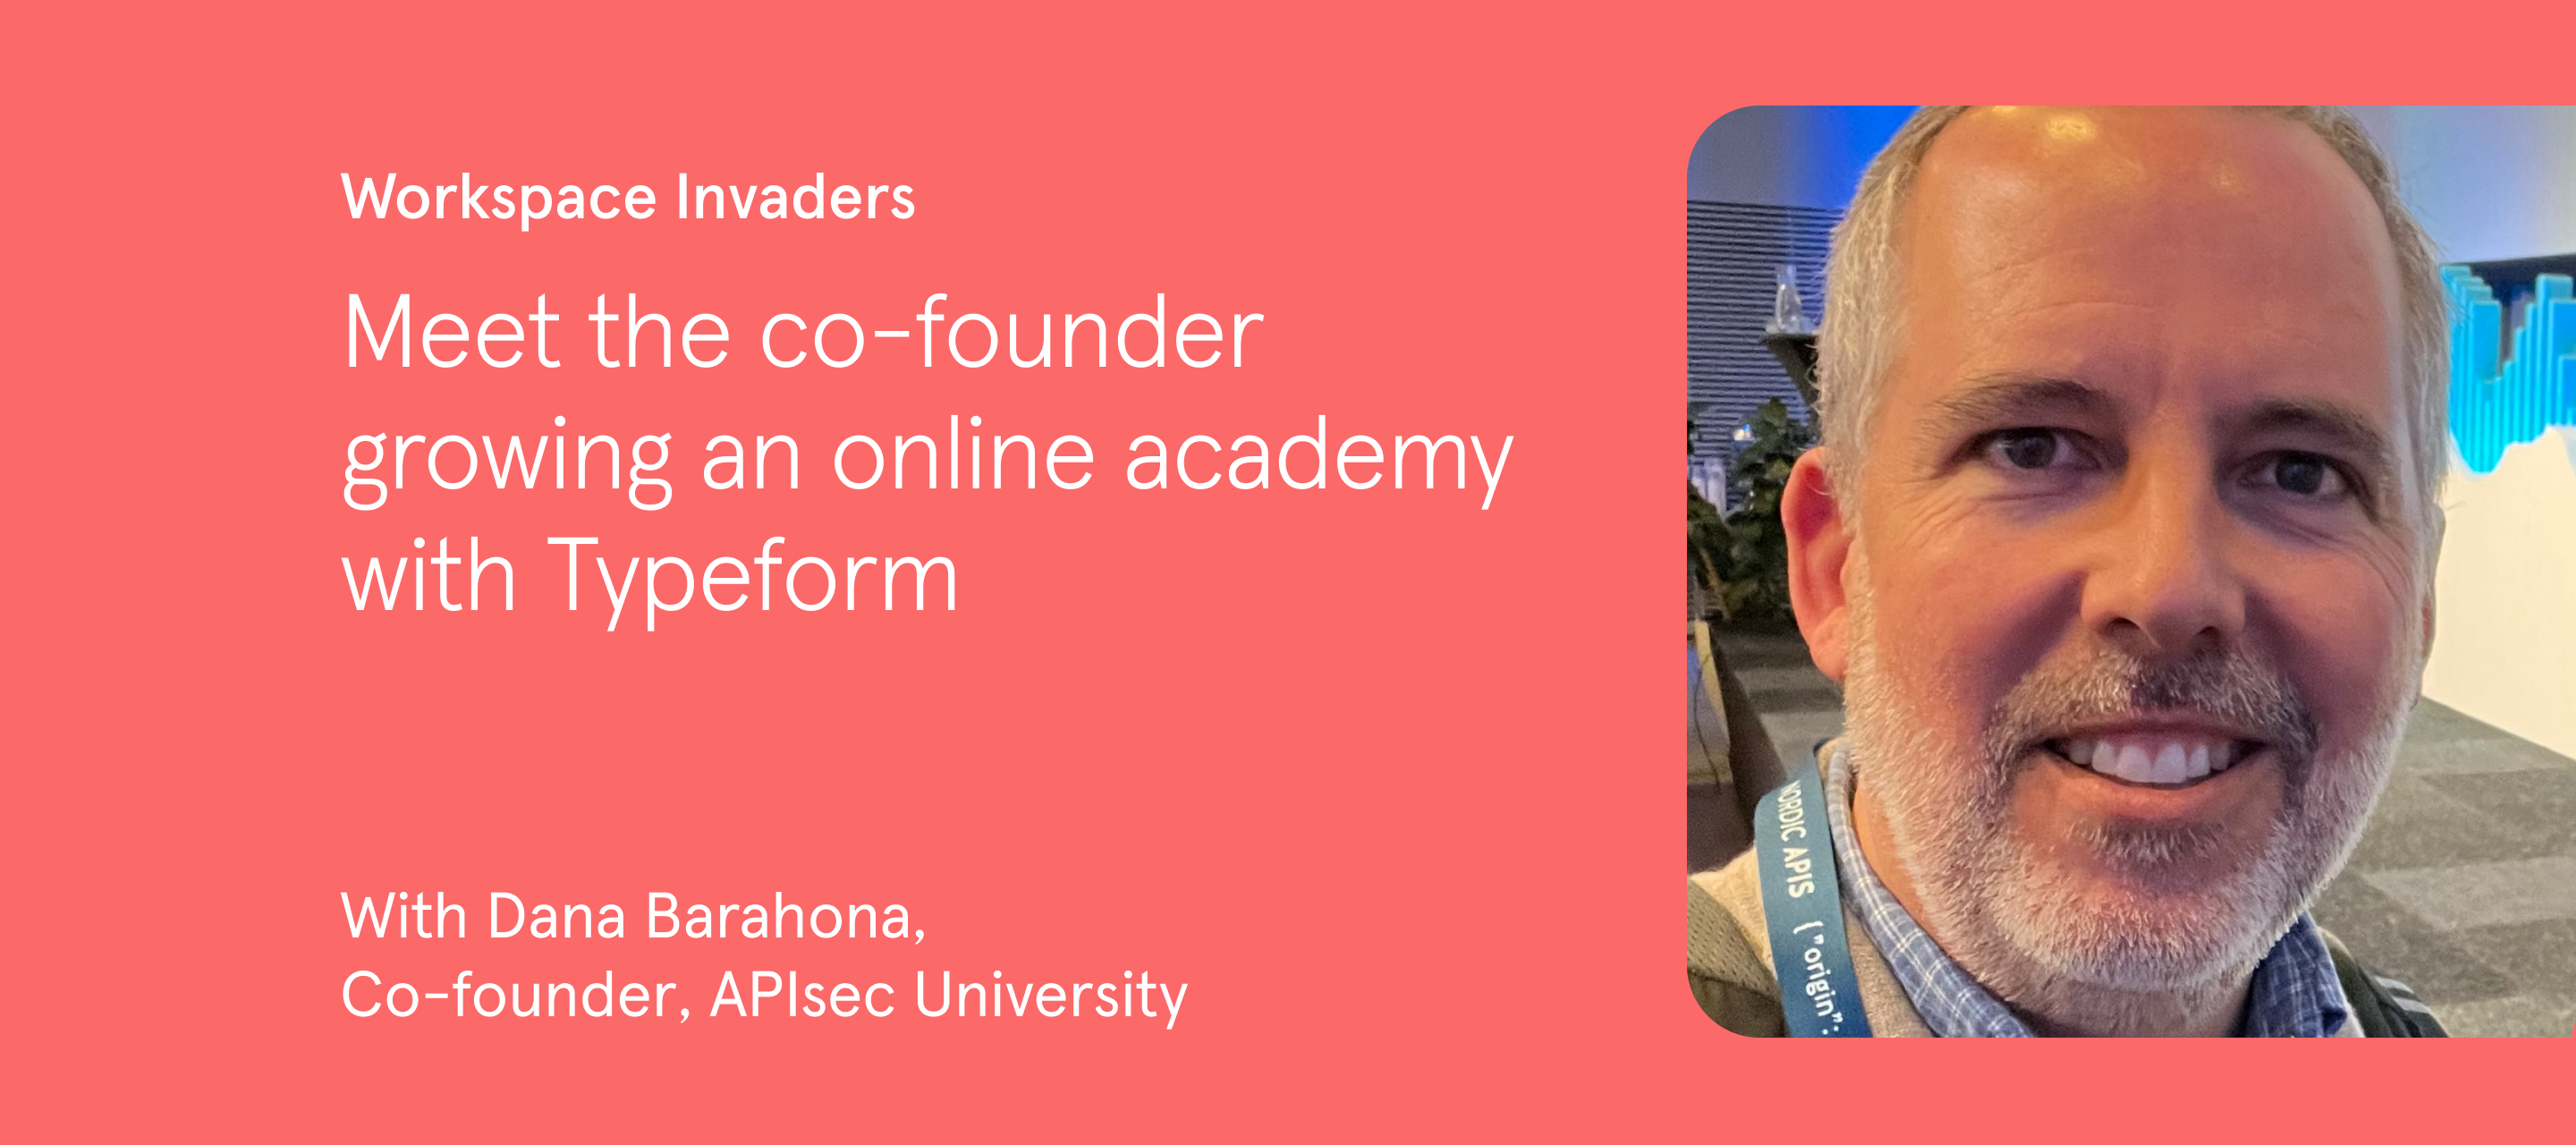 Workspace Invaders: Meet the co-founder growing an online academy with Typeform